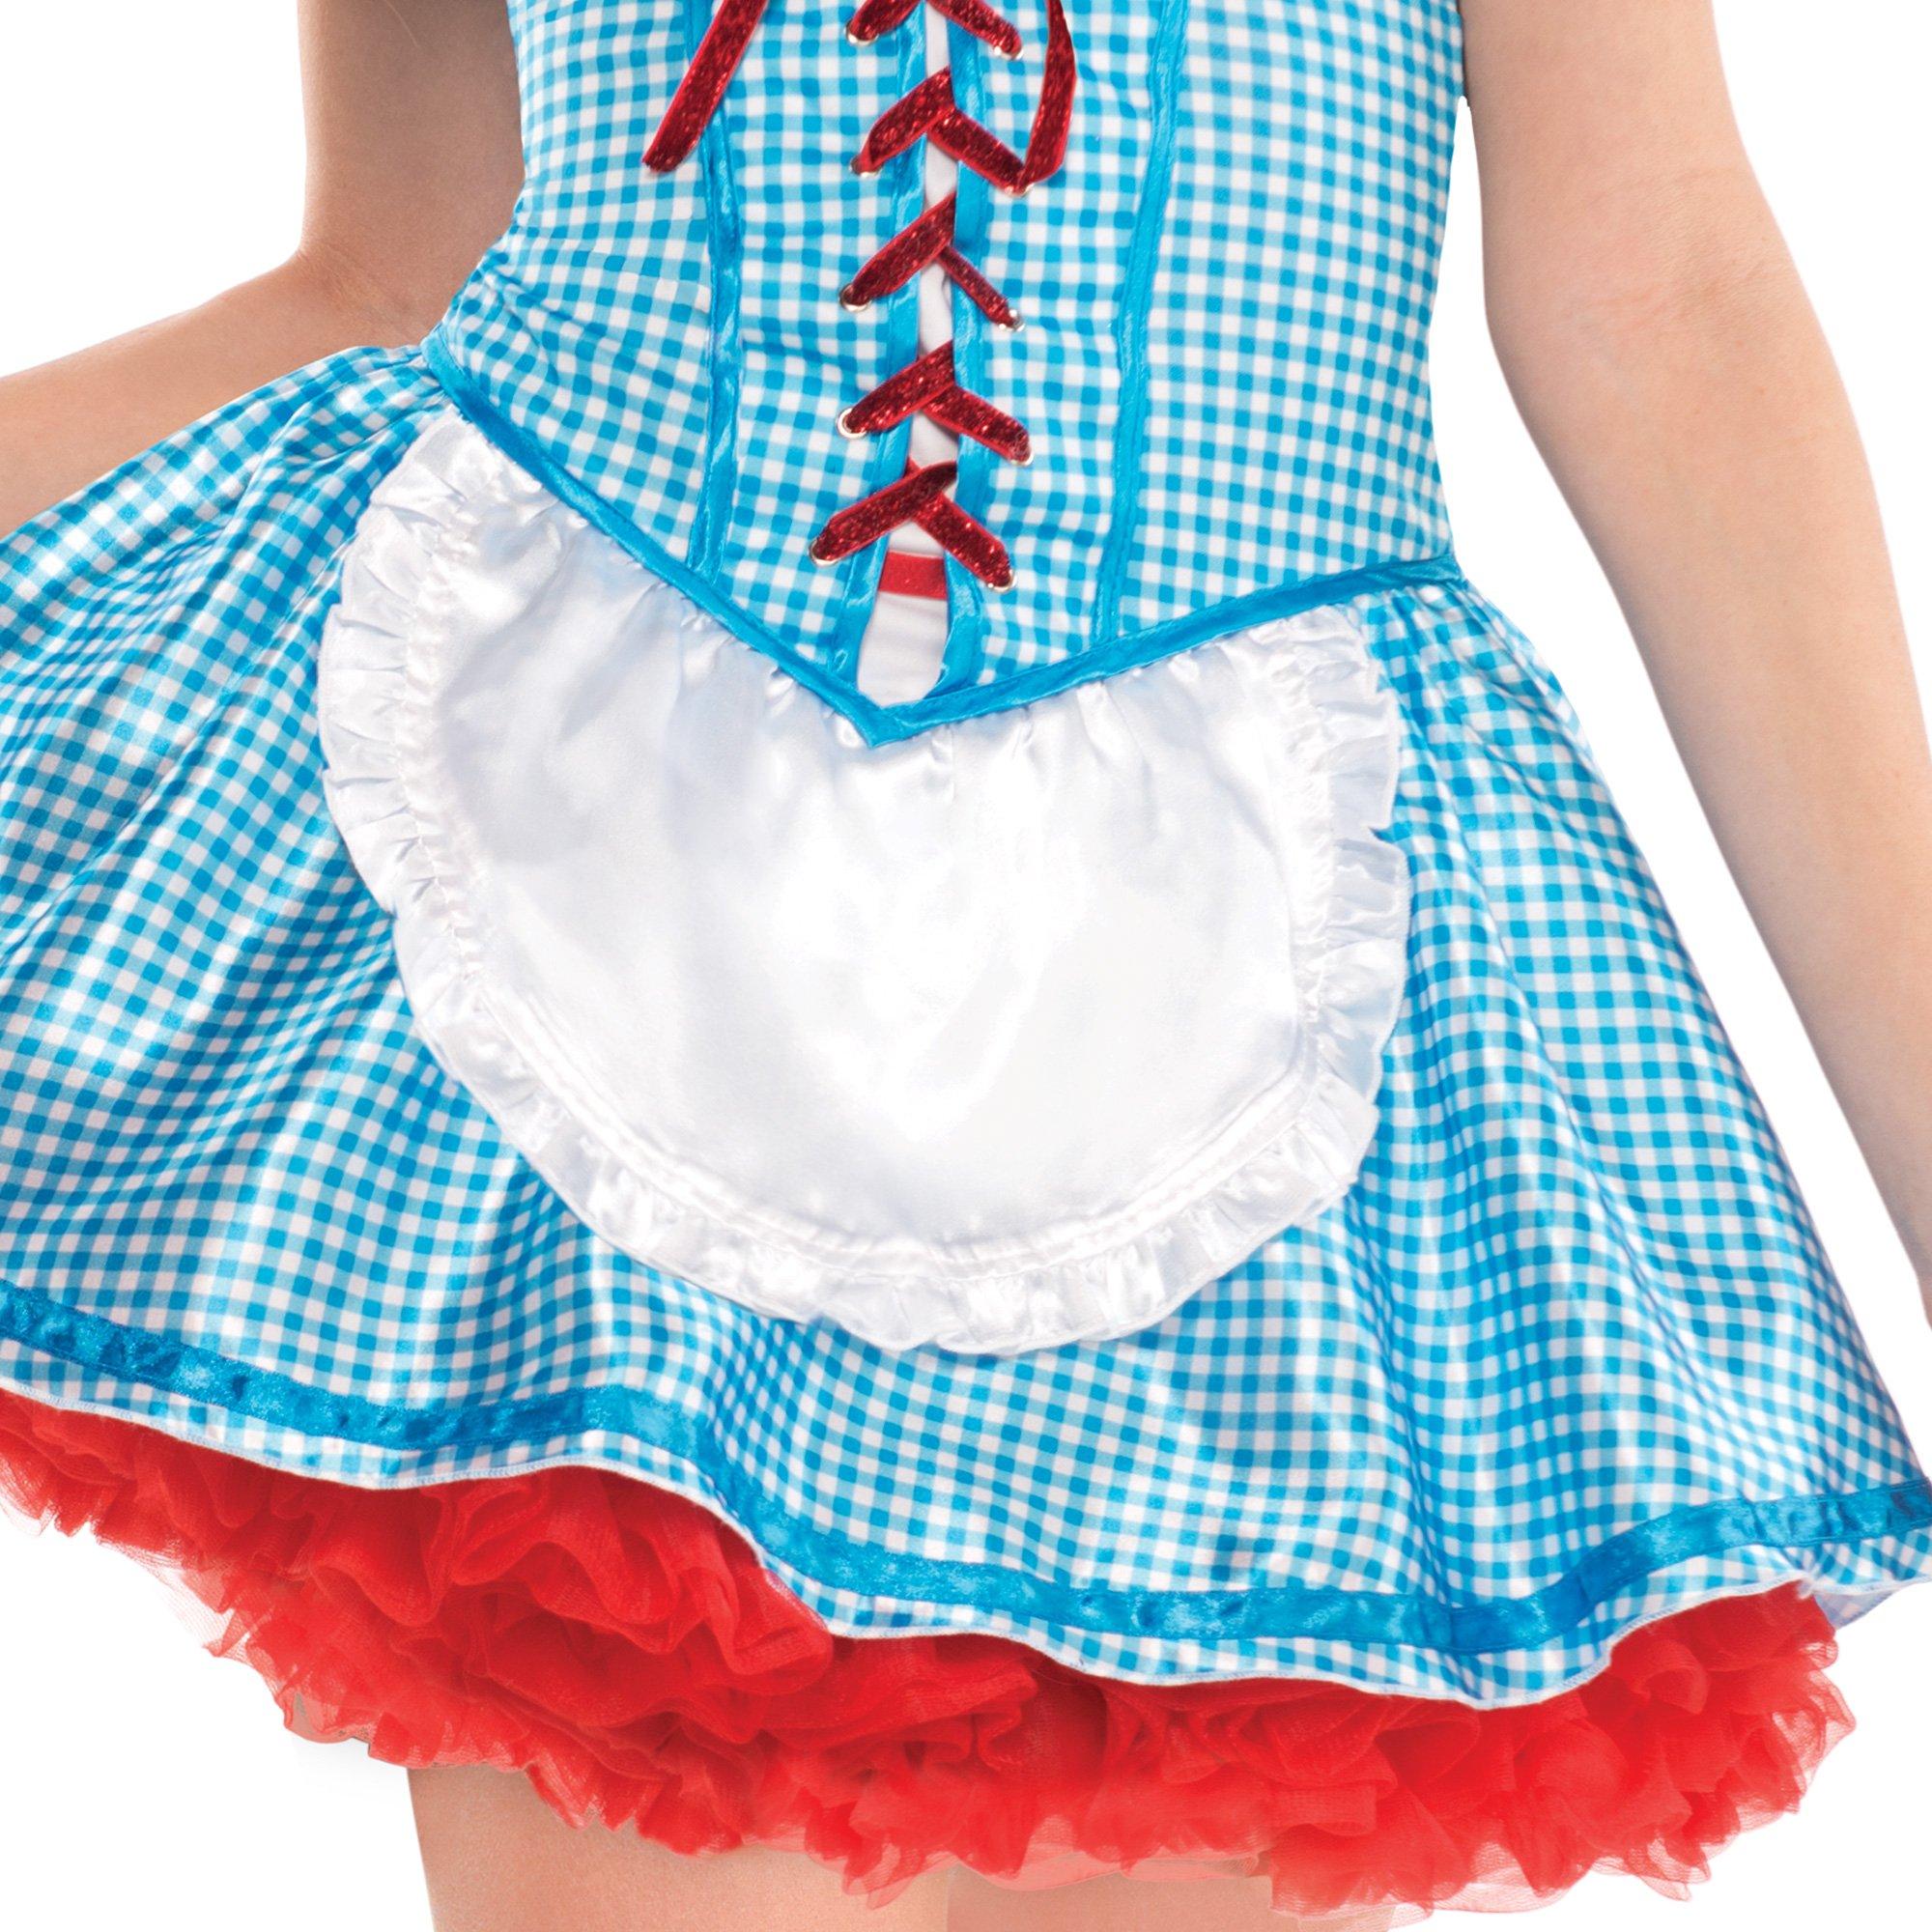 Adult Dorothy Costume - The Wizard of Oz